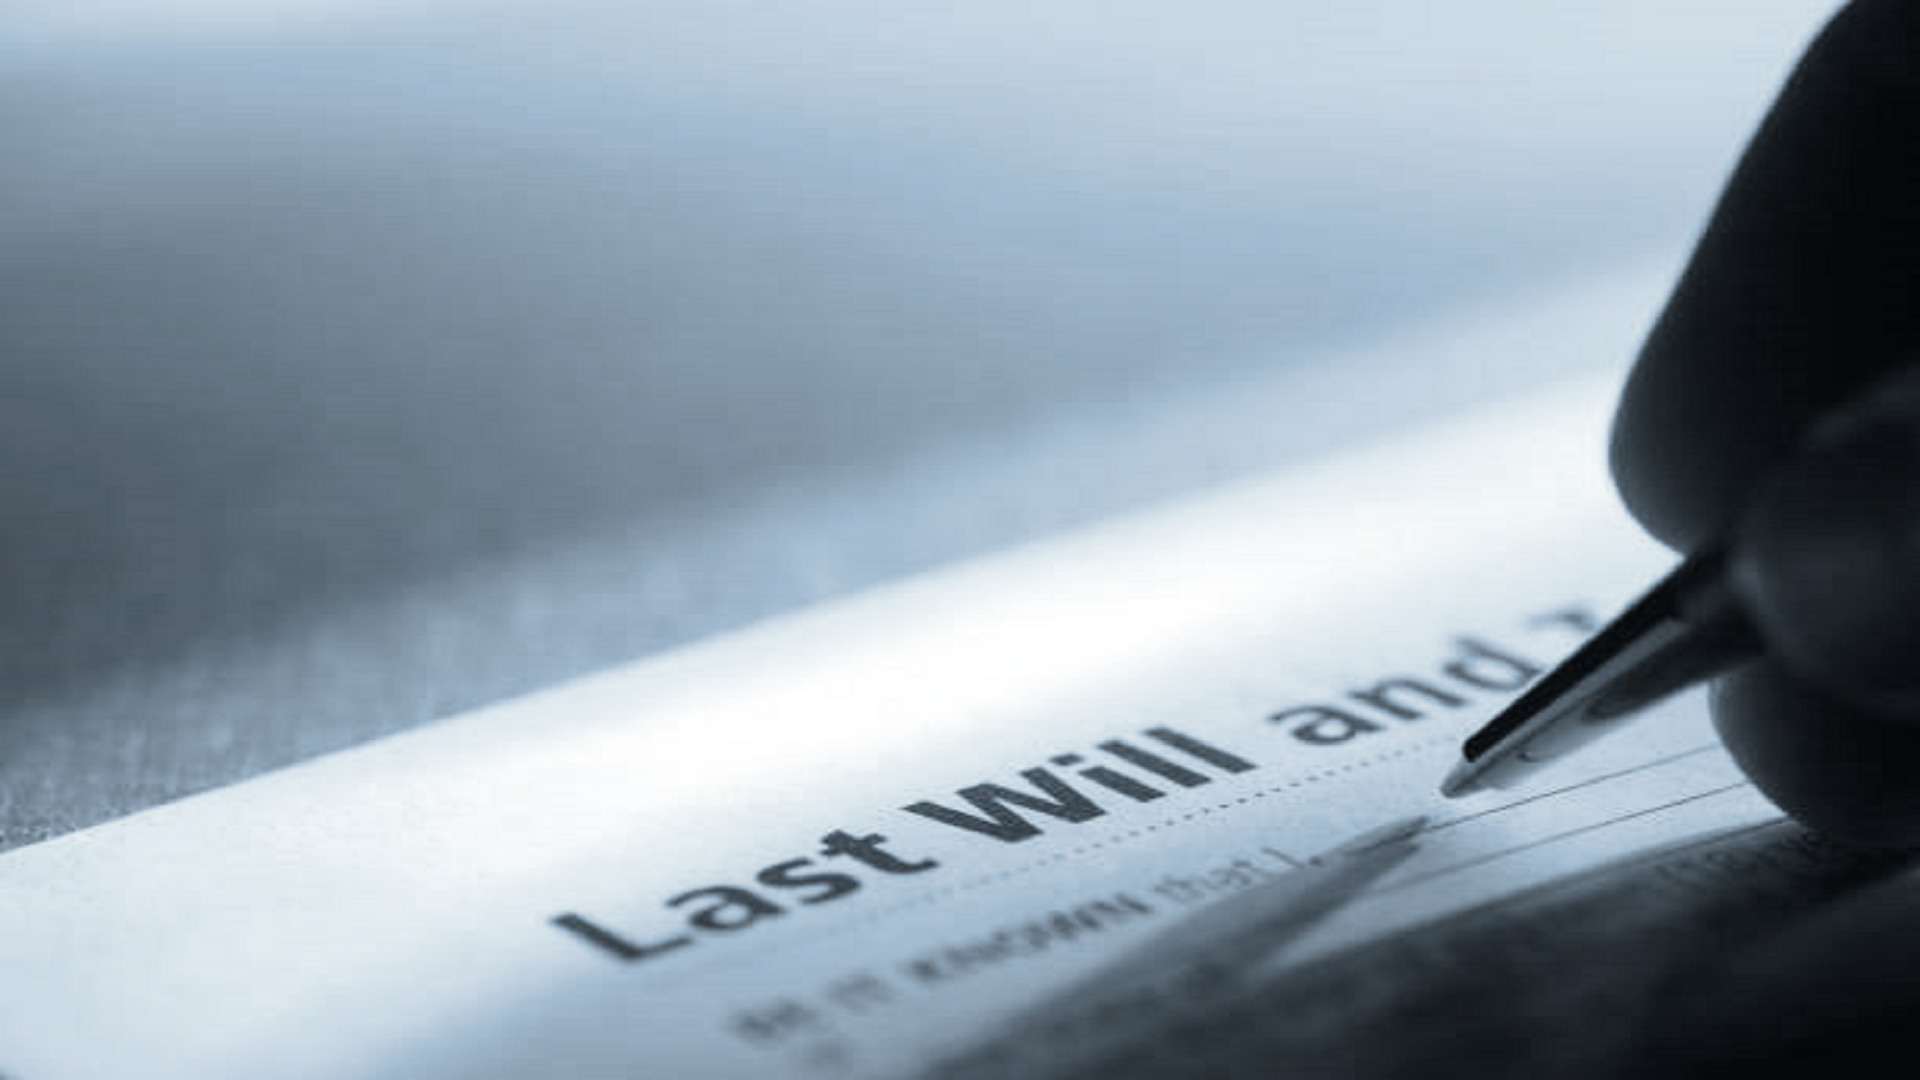 The importance of making a will